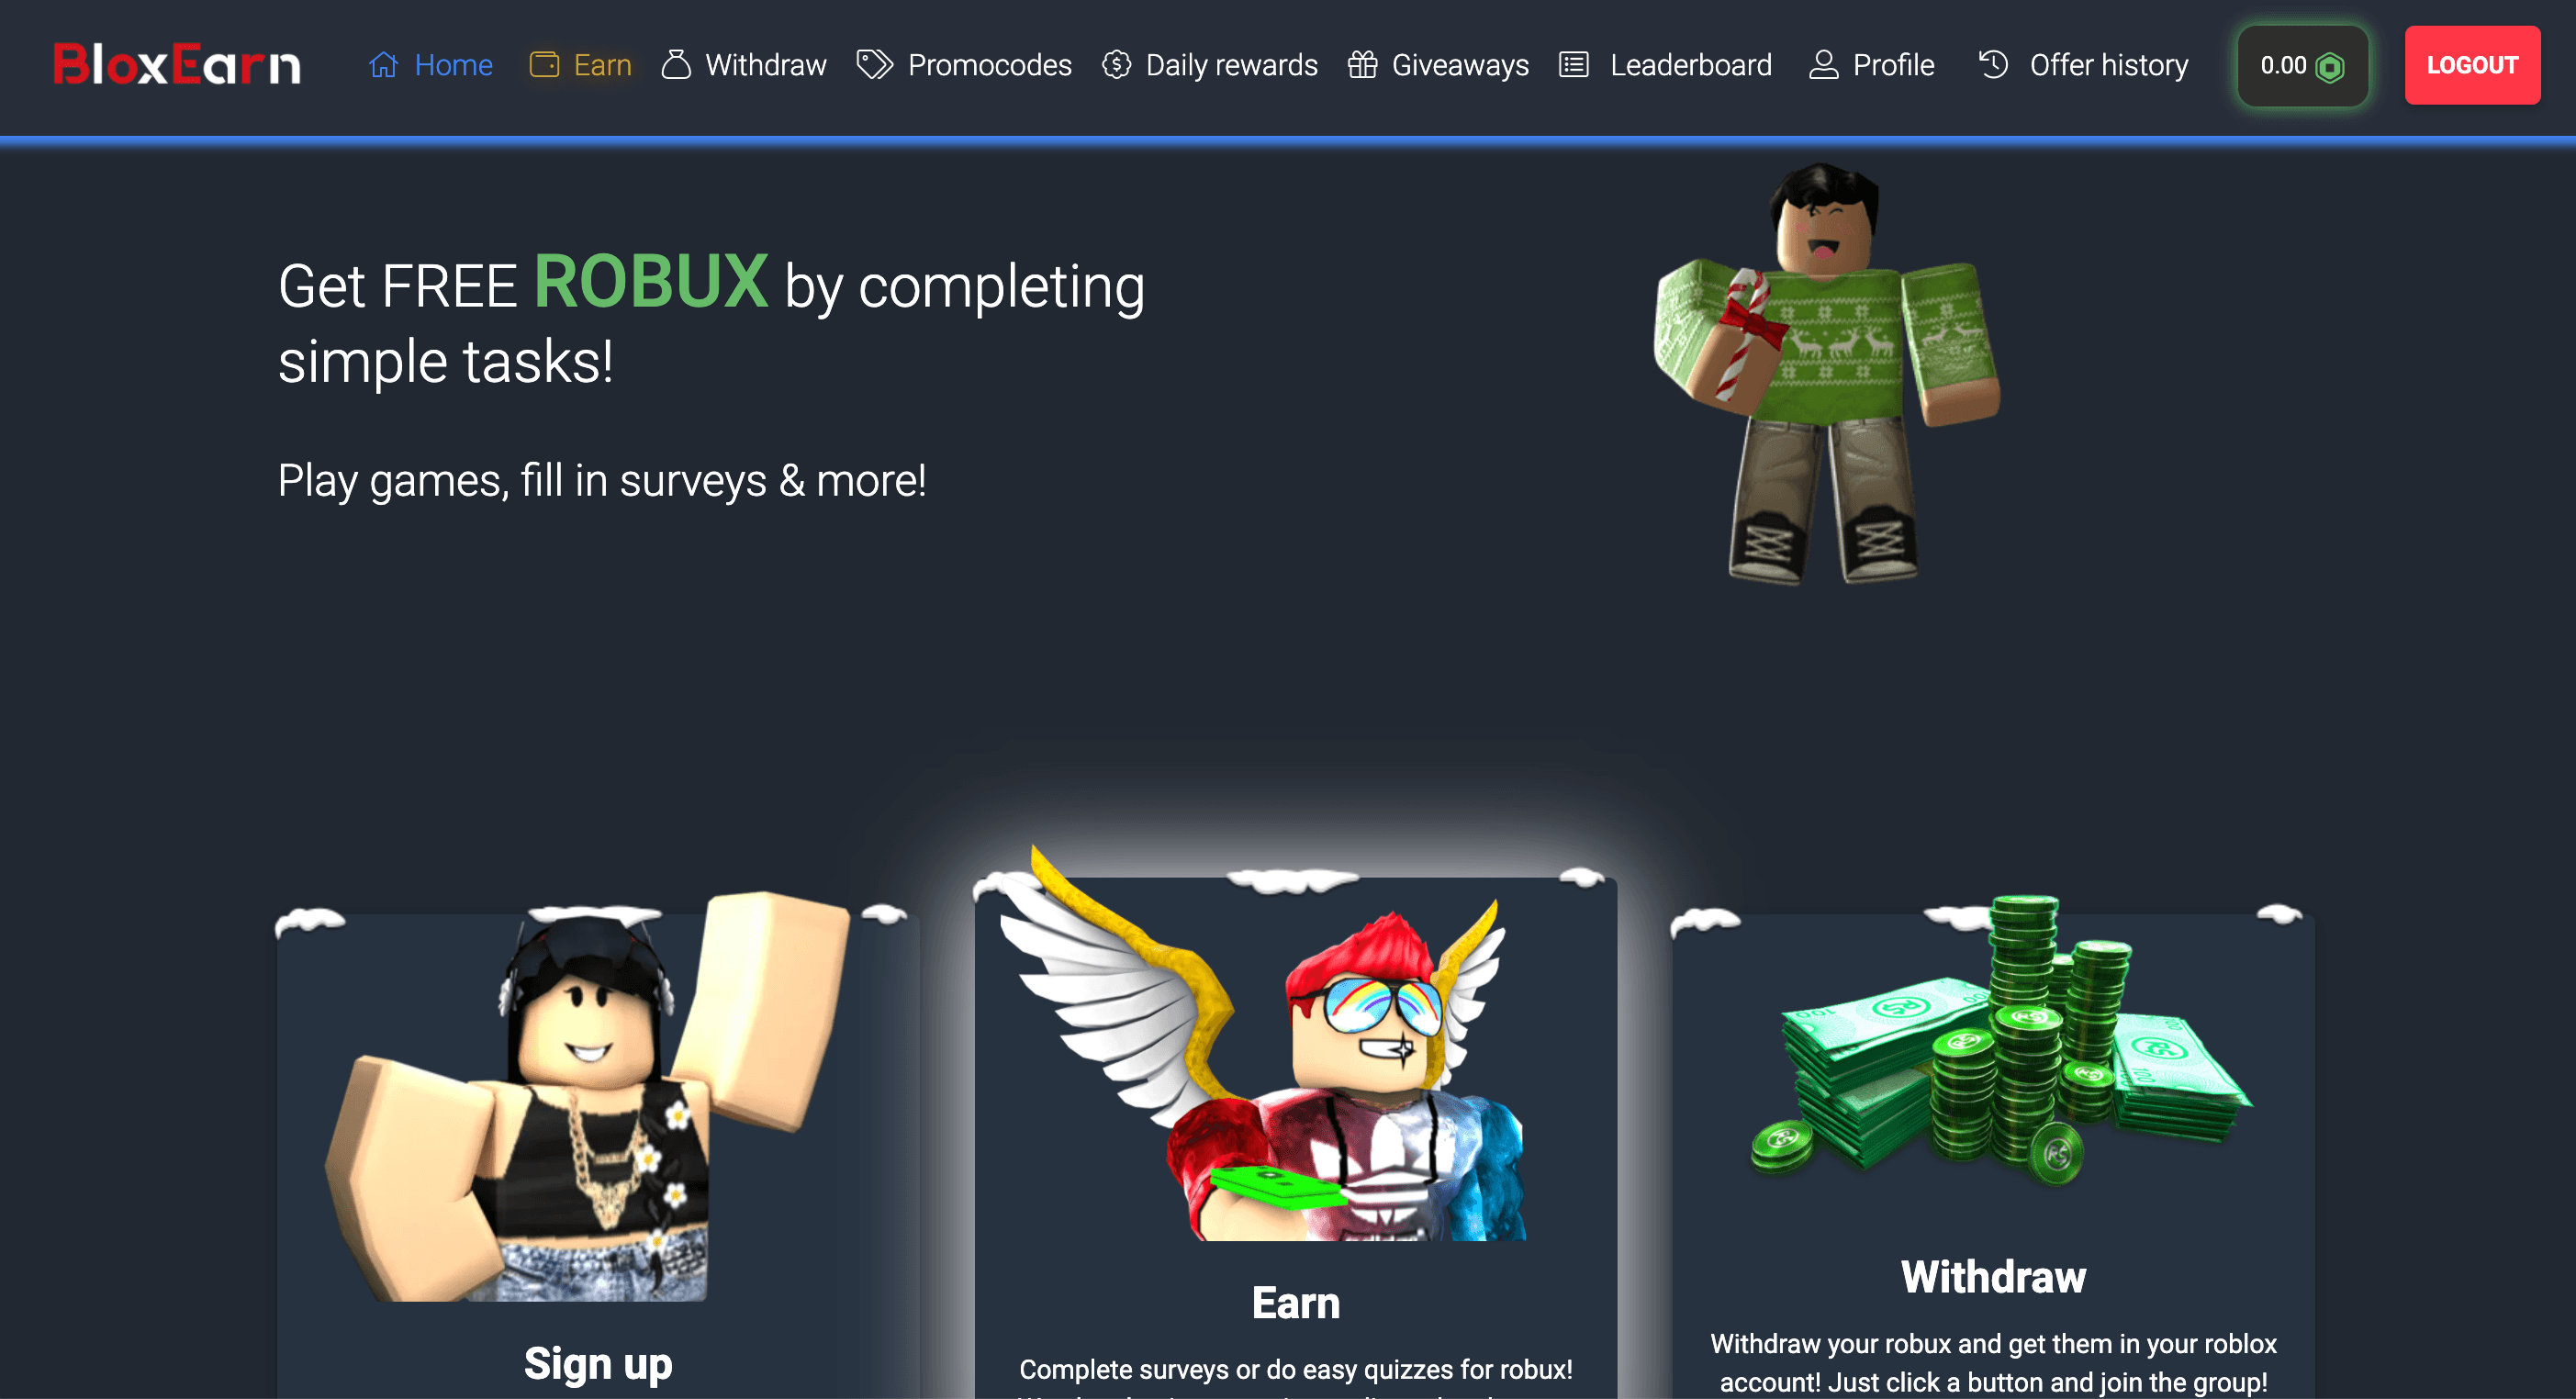 Roblox Promo Codes July 2021 For 1 000 Free Robux Items - how to get robux on roblox by playing games